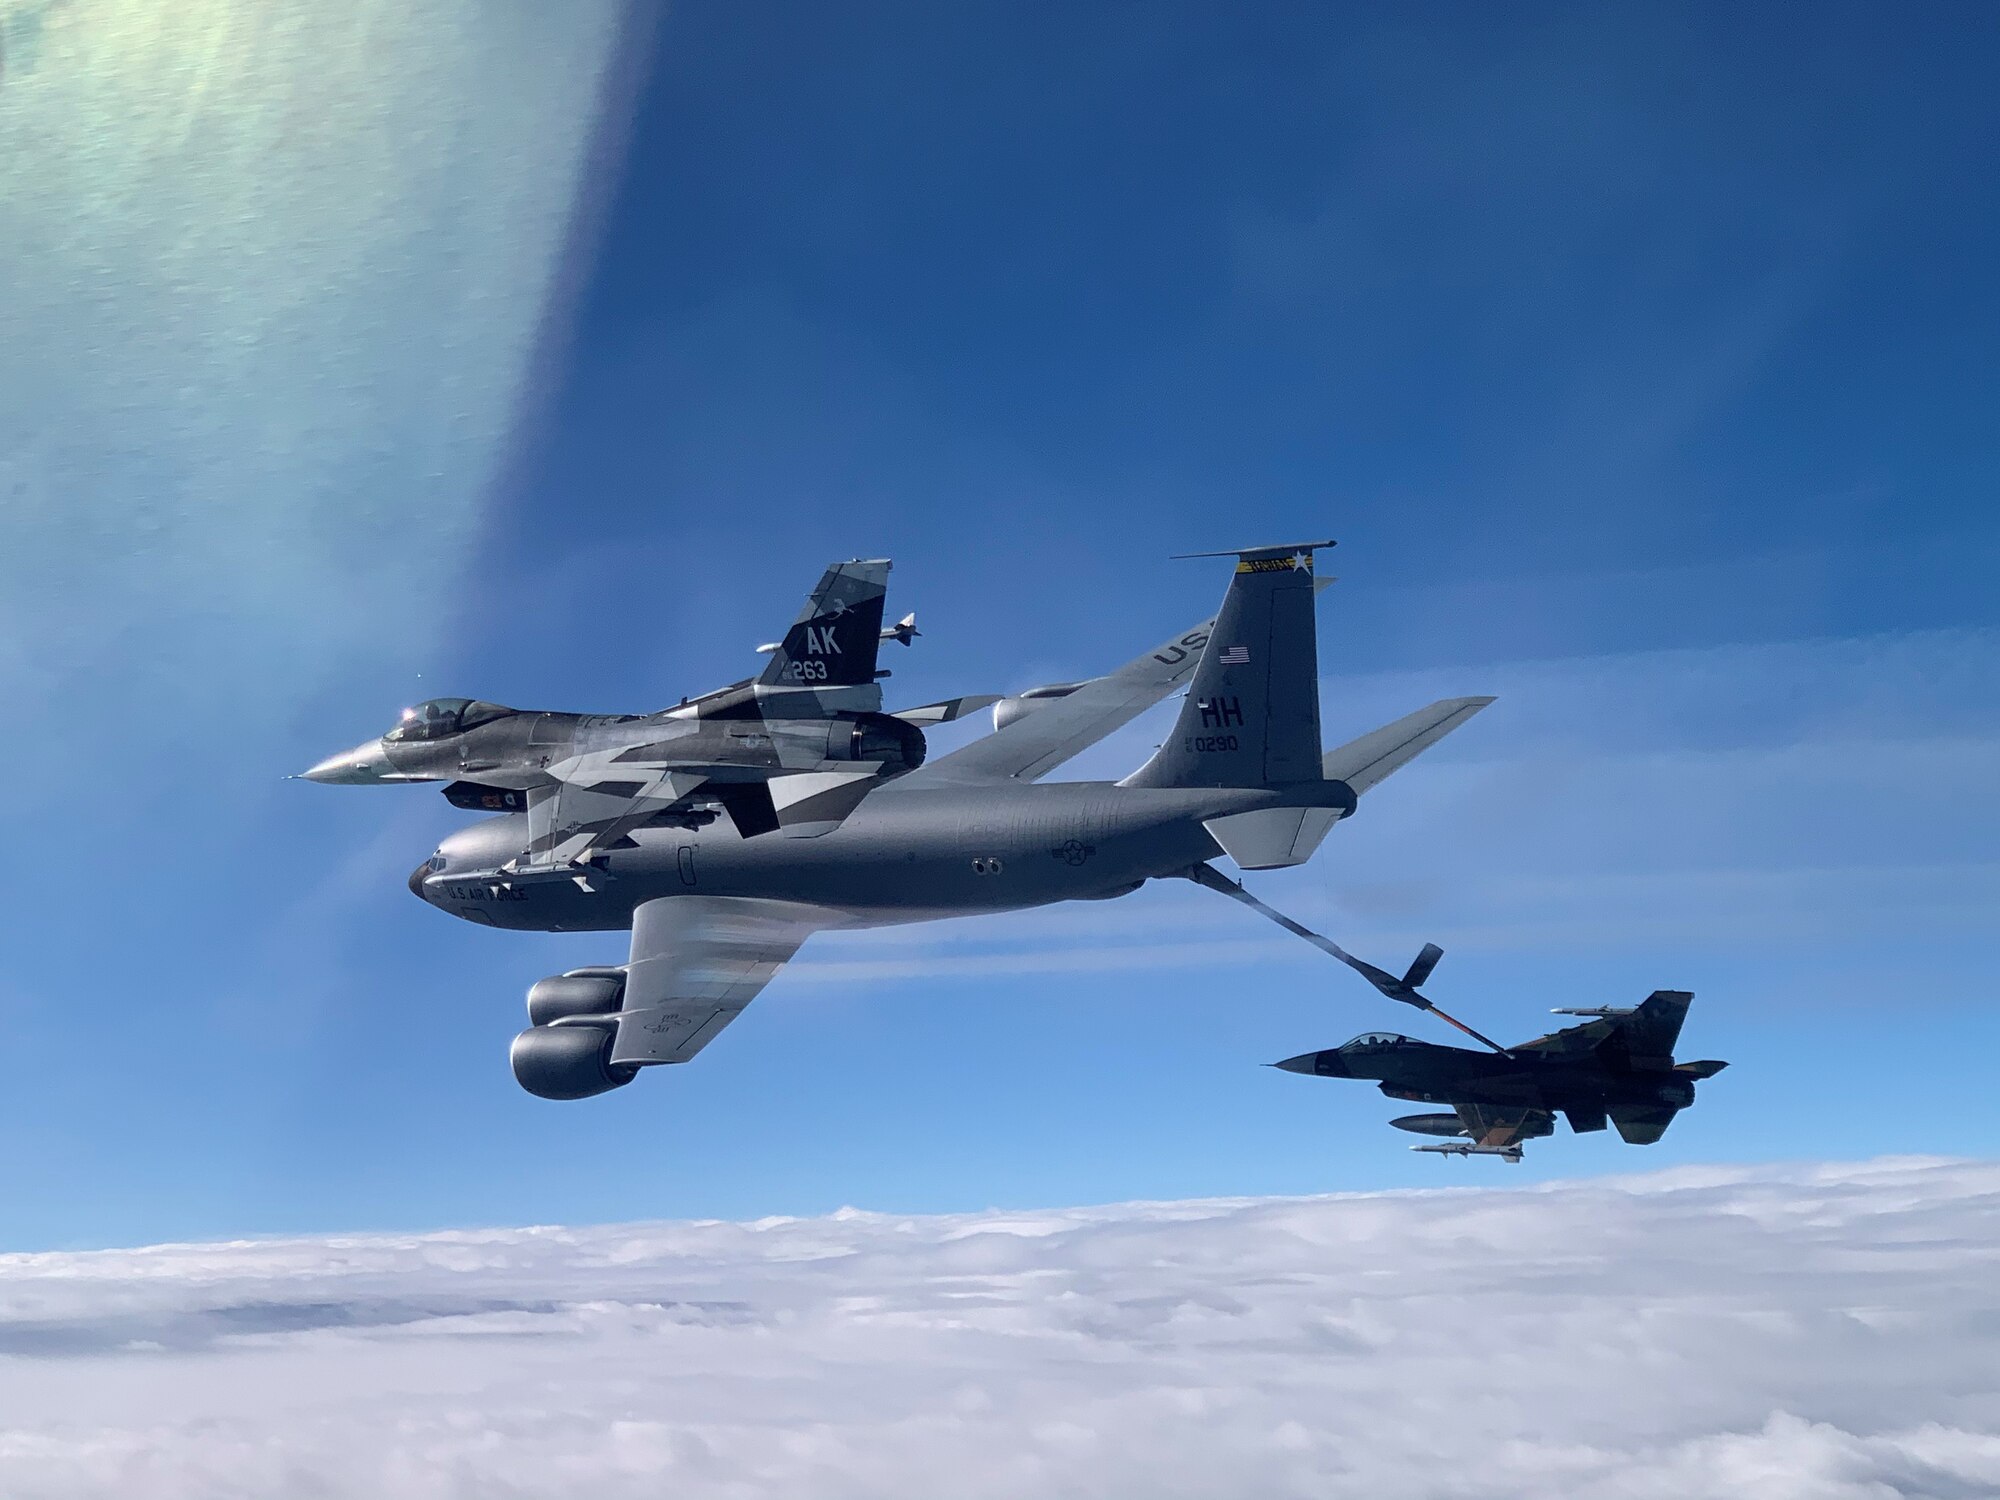 An F-16 Fighting Falcon from the 18th Aggressor Squadron receives fuel from a KC-135 Stratotanker from the 203rd Air Refueling Squadron March 10, 2021, near Oahu, Hawaii. The aircraft practiced combat tactics alongside fifth-generation F-22 Raptors from the 199th and 19th Fighter Squadrons for exercise Pacific Raptor. The Alaska-based F-16s, known as ‘Aggressors,’ simulate combat tactics likely to be faced in the event of an air-to-air battle.